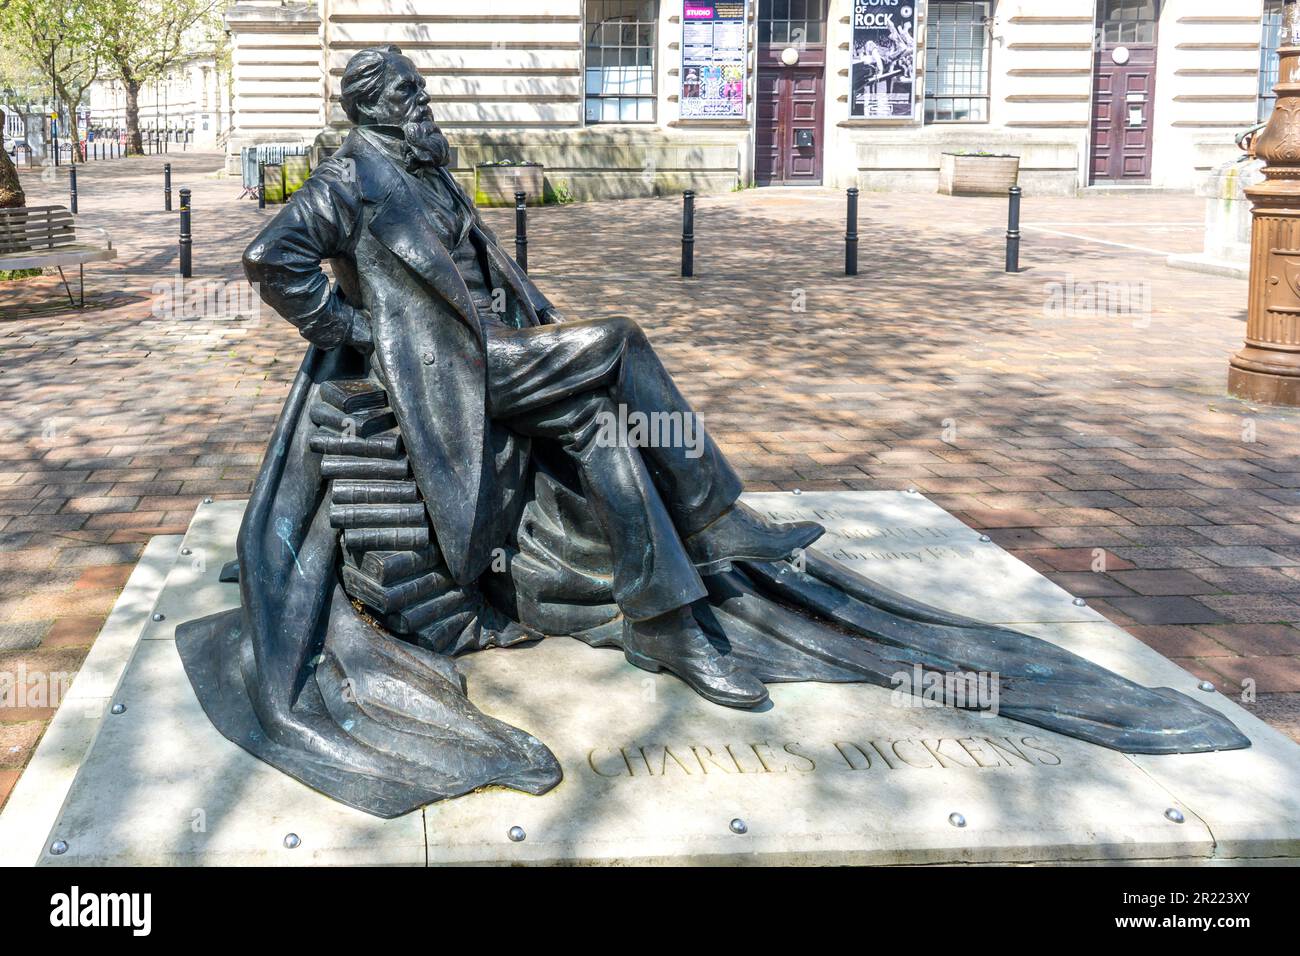 Charles Dickens (Victorian novelist) statue, Guildhall Square, Portsmouth, Hampshire, England, United Kingdom Stock Photo